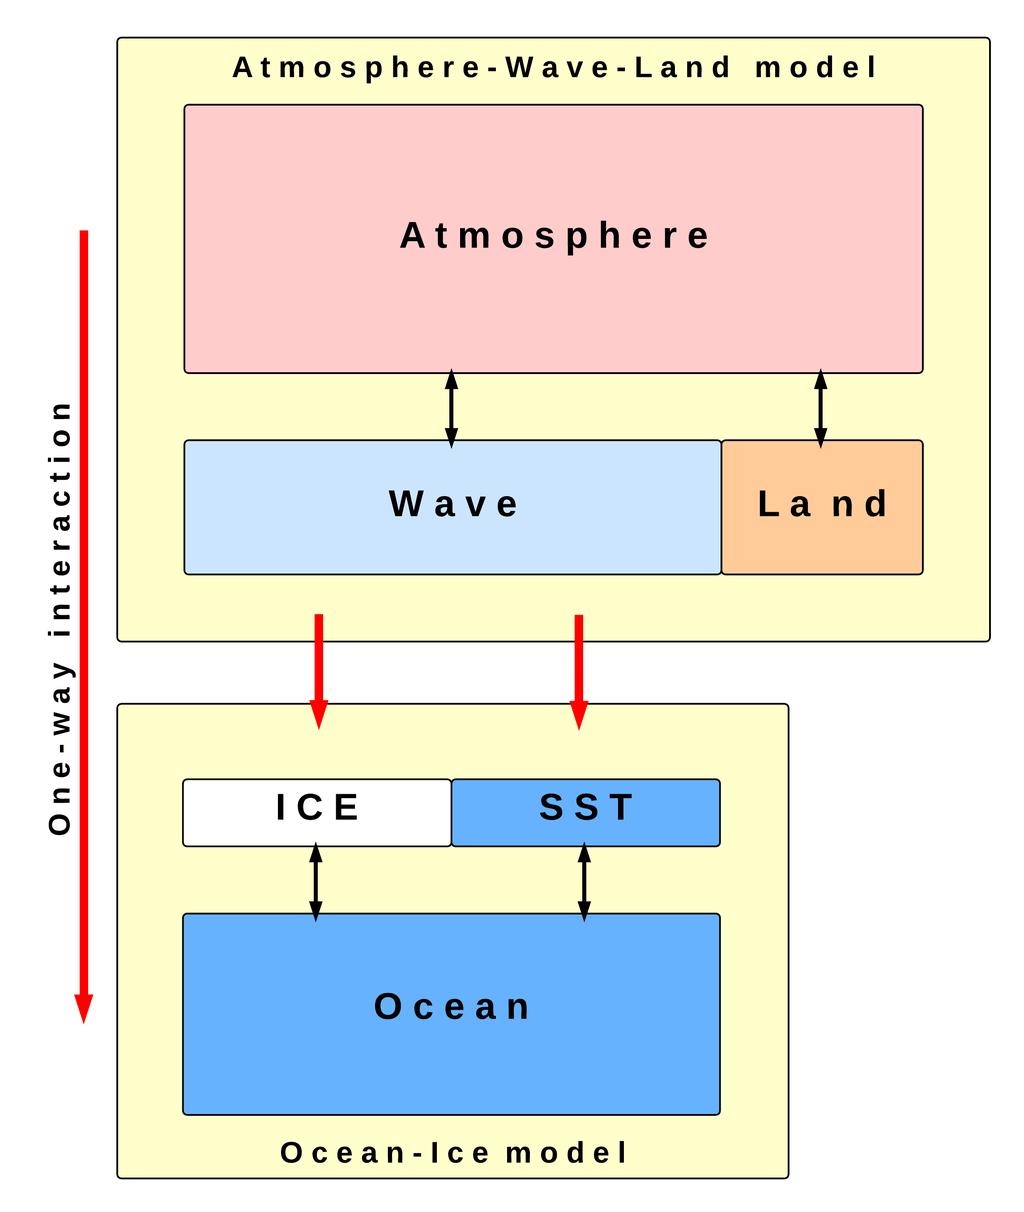 Operational reanalysis systems at ECMWF Uncoupled assimilation system Atmospheric reanalysis [ERA-INTERIM]: consistent with the atmospheric-wave-land model air-sea interface is prescribed Ocean